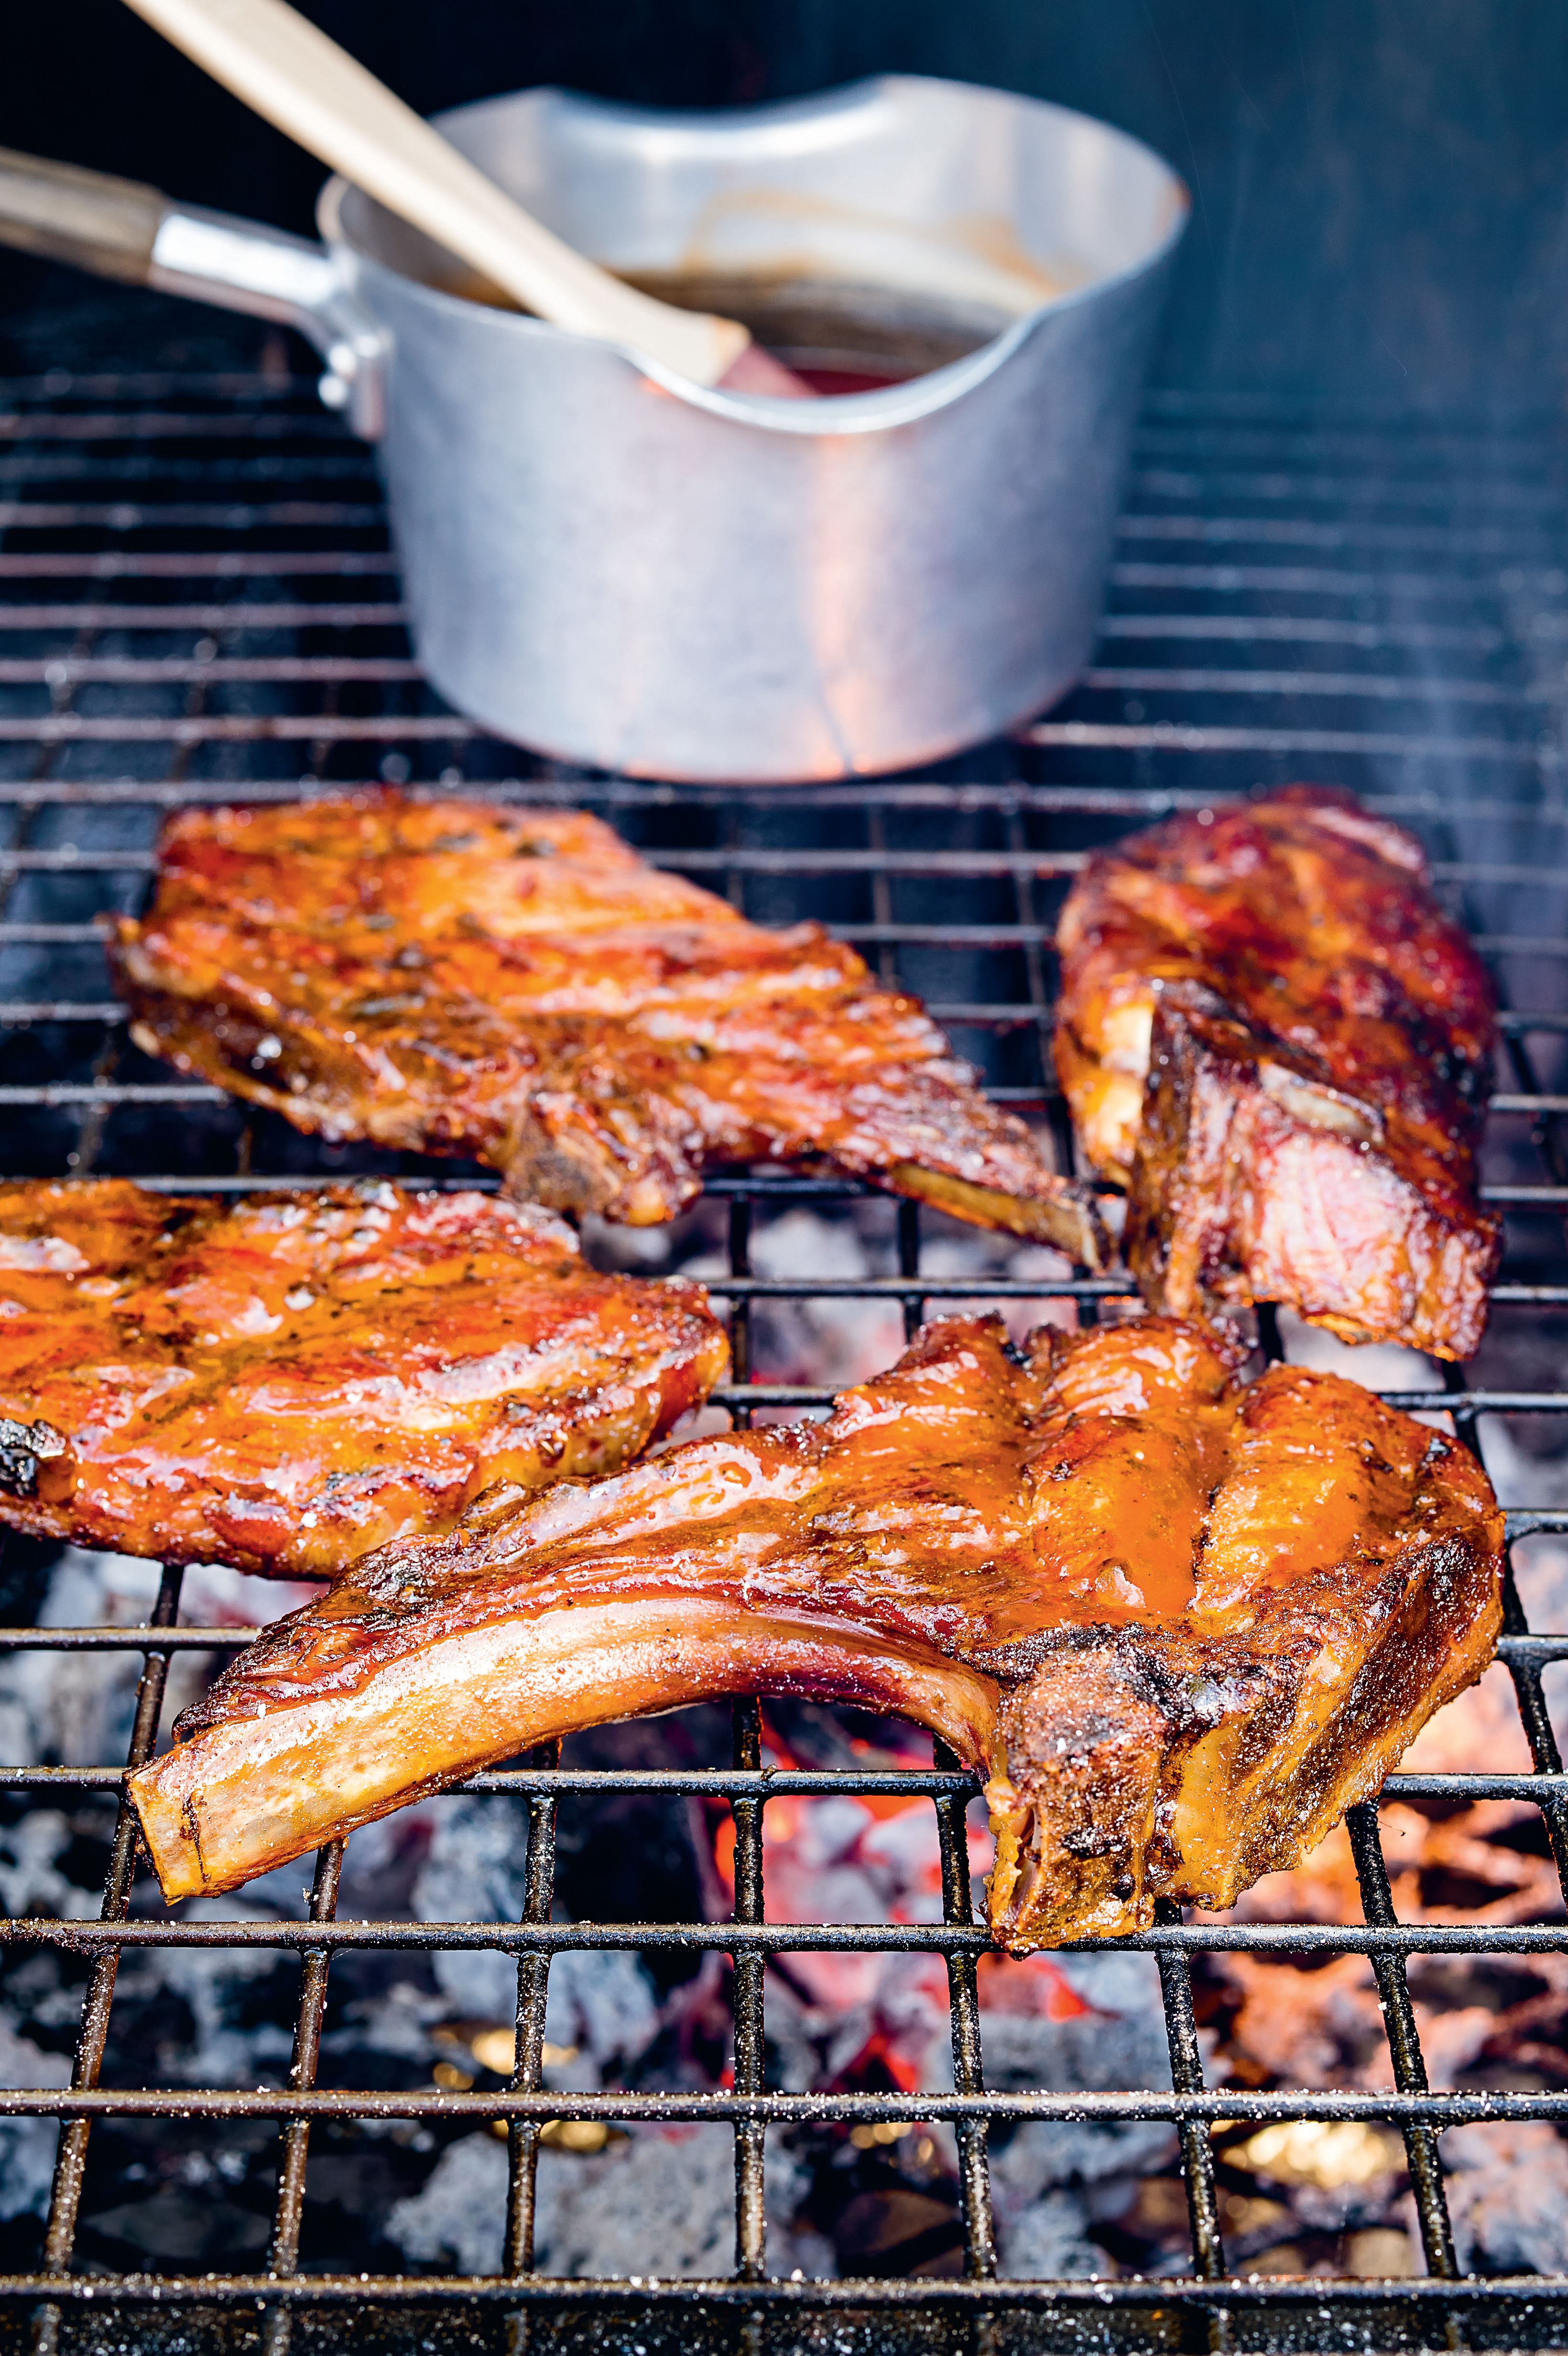 Country-style pork ribs with West country cider liquor